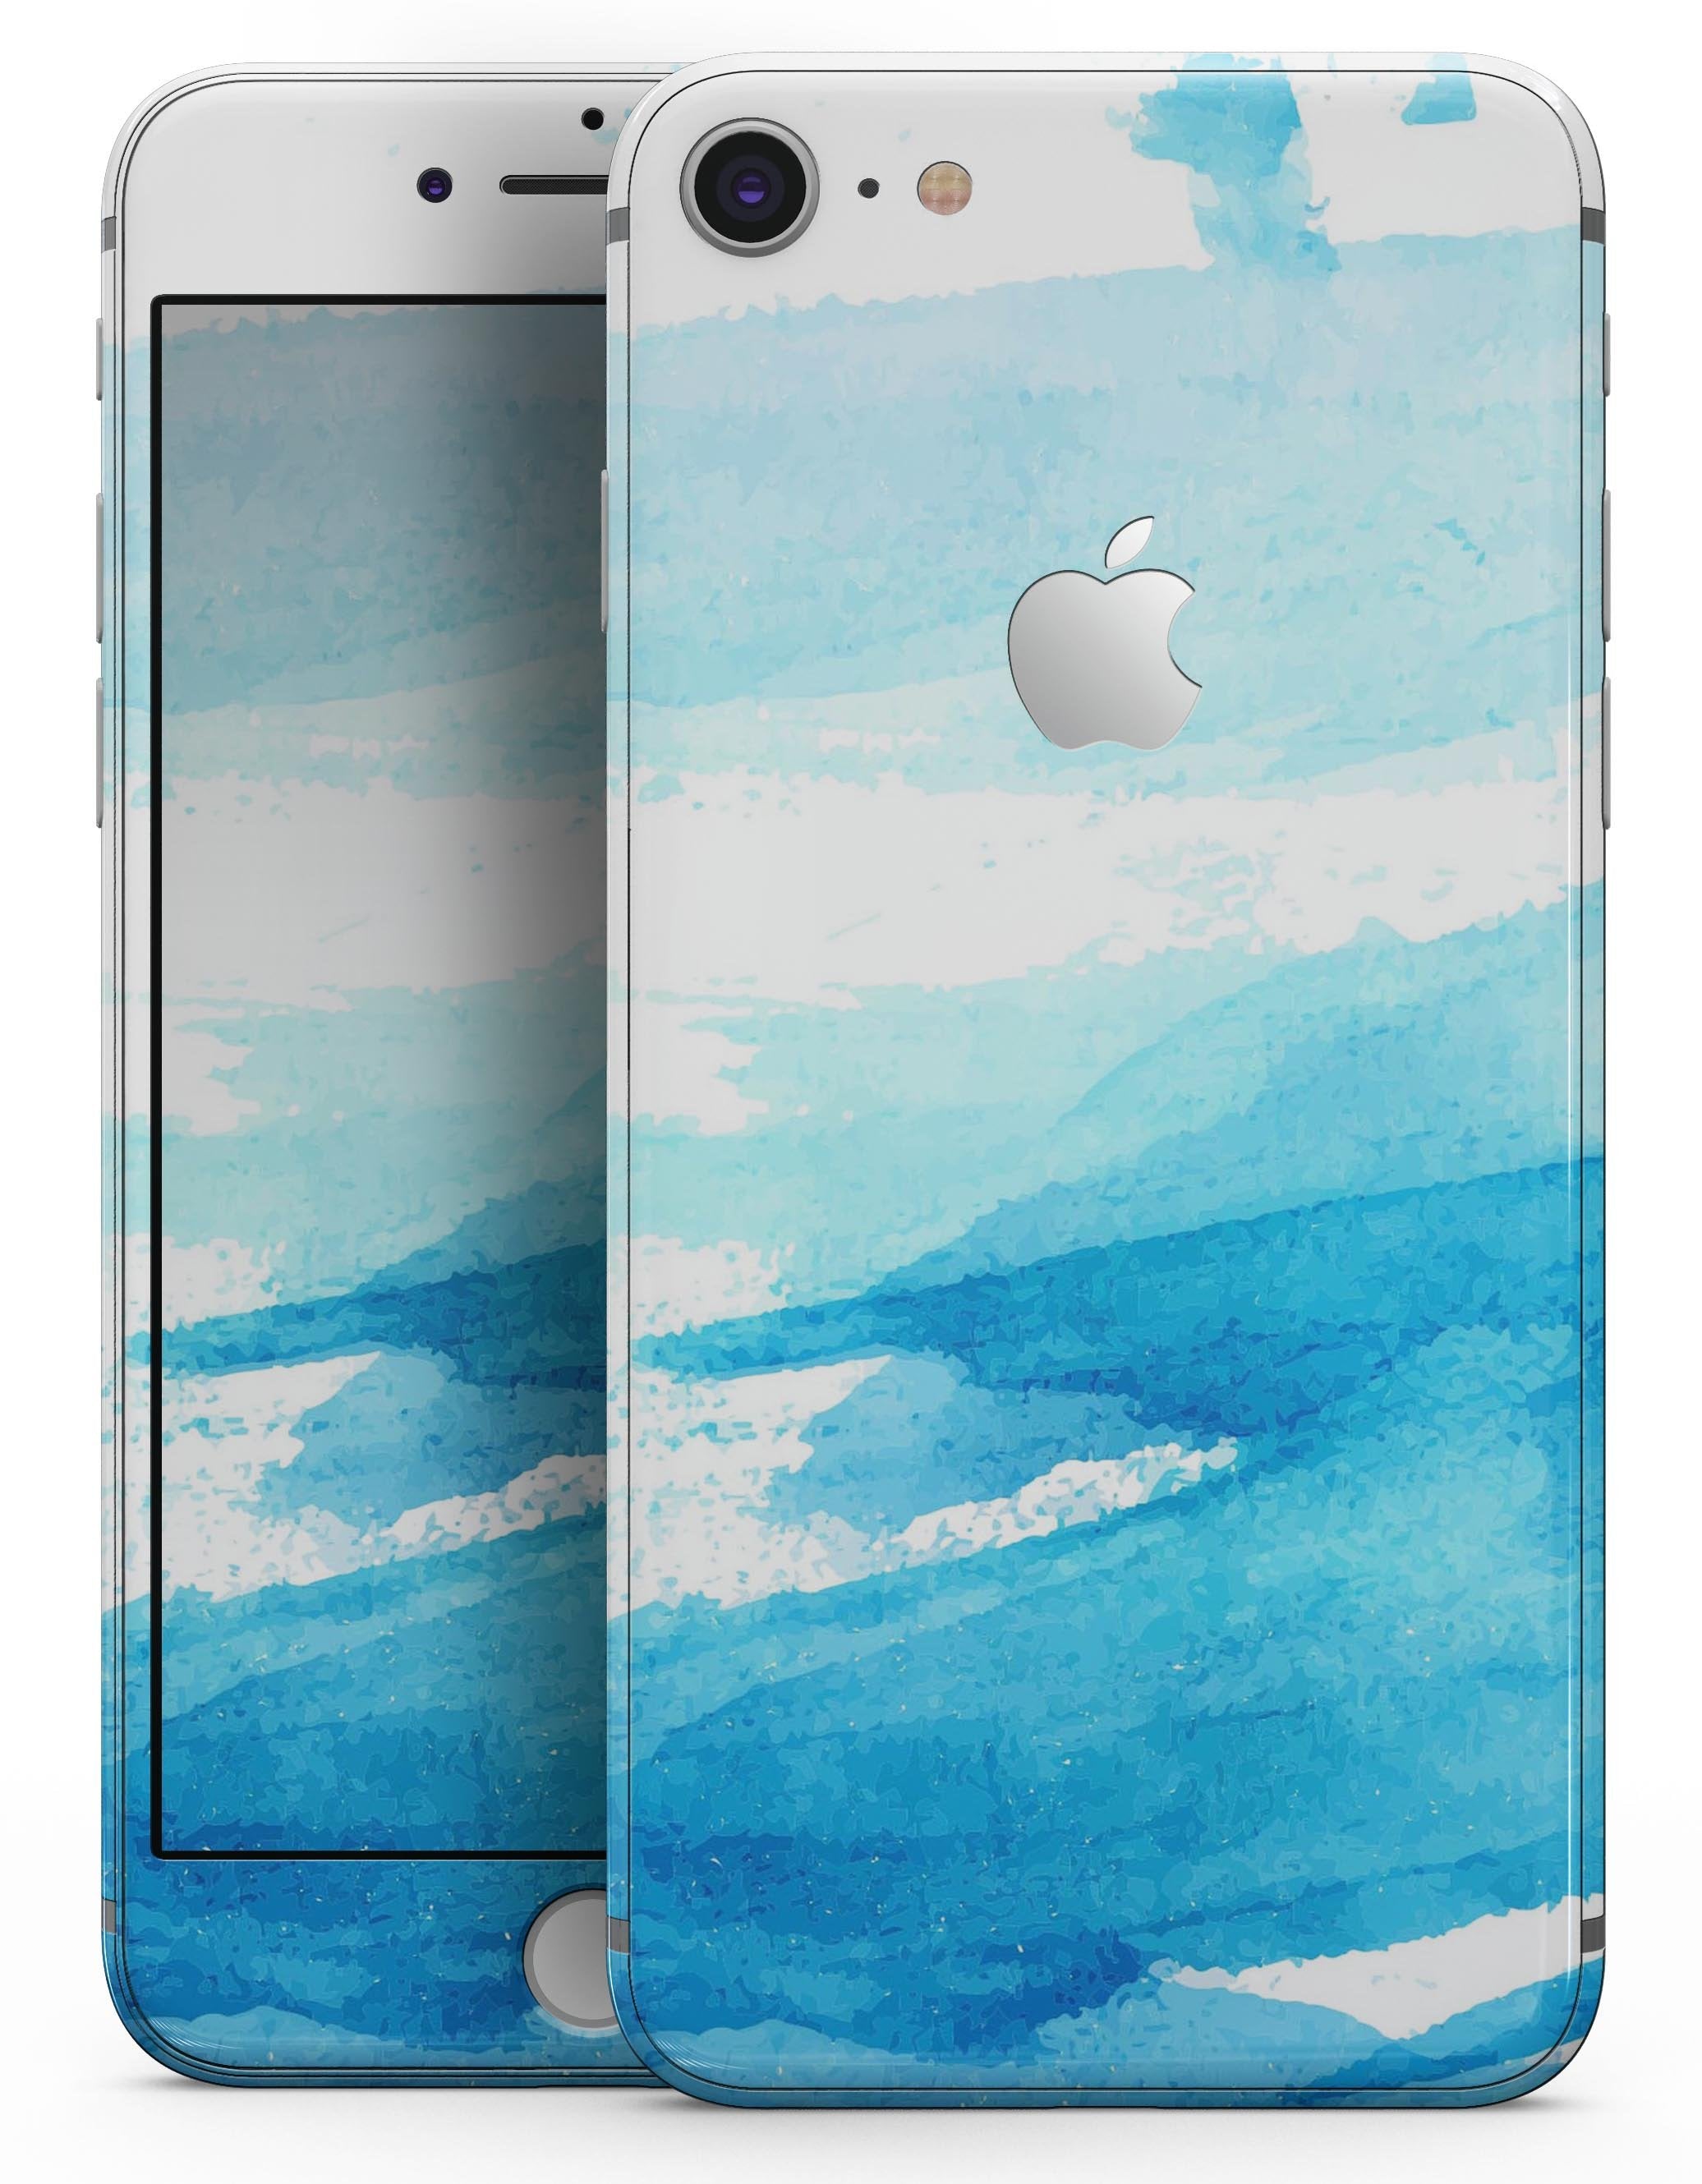 Abstract Blue Strokes - Skin-kit for the iPhone 8 or 8 Plus